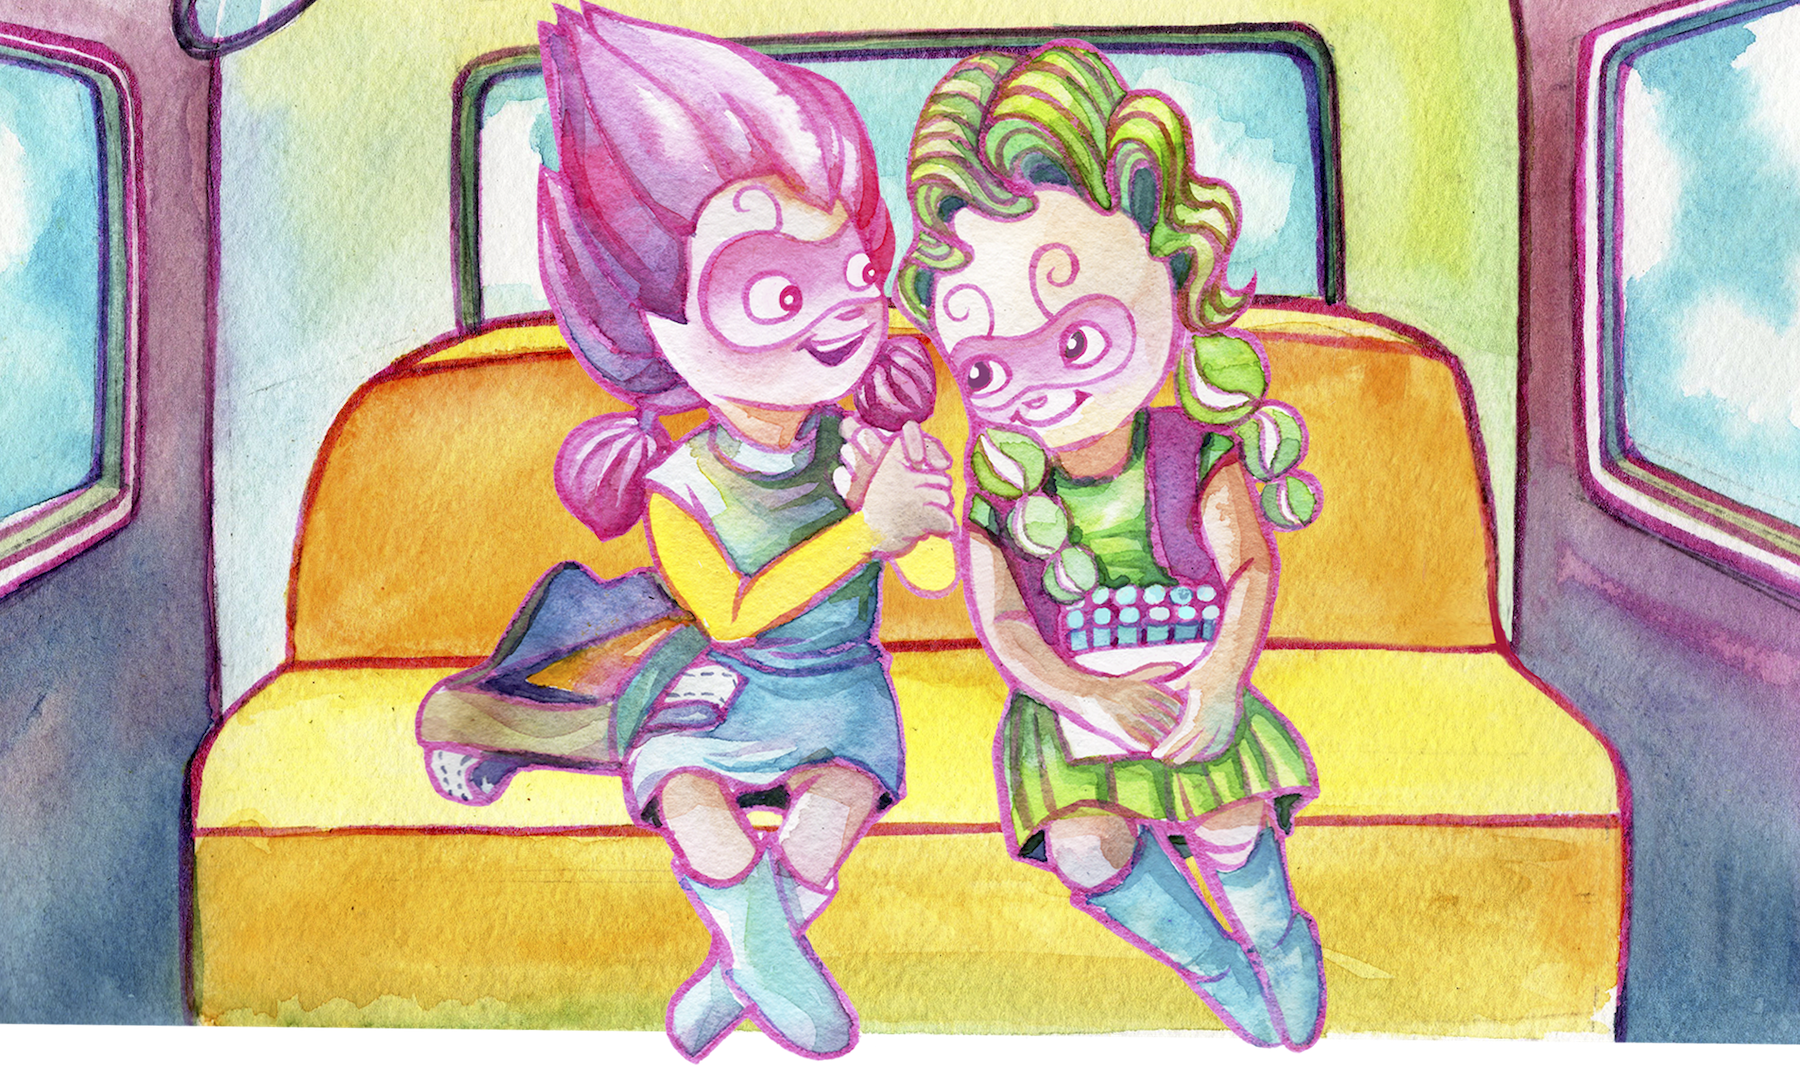 Two children with brightly colored hair and superhero masks signing on a bus.